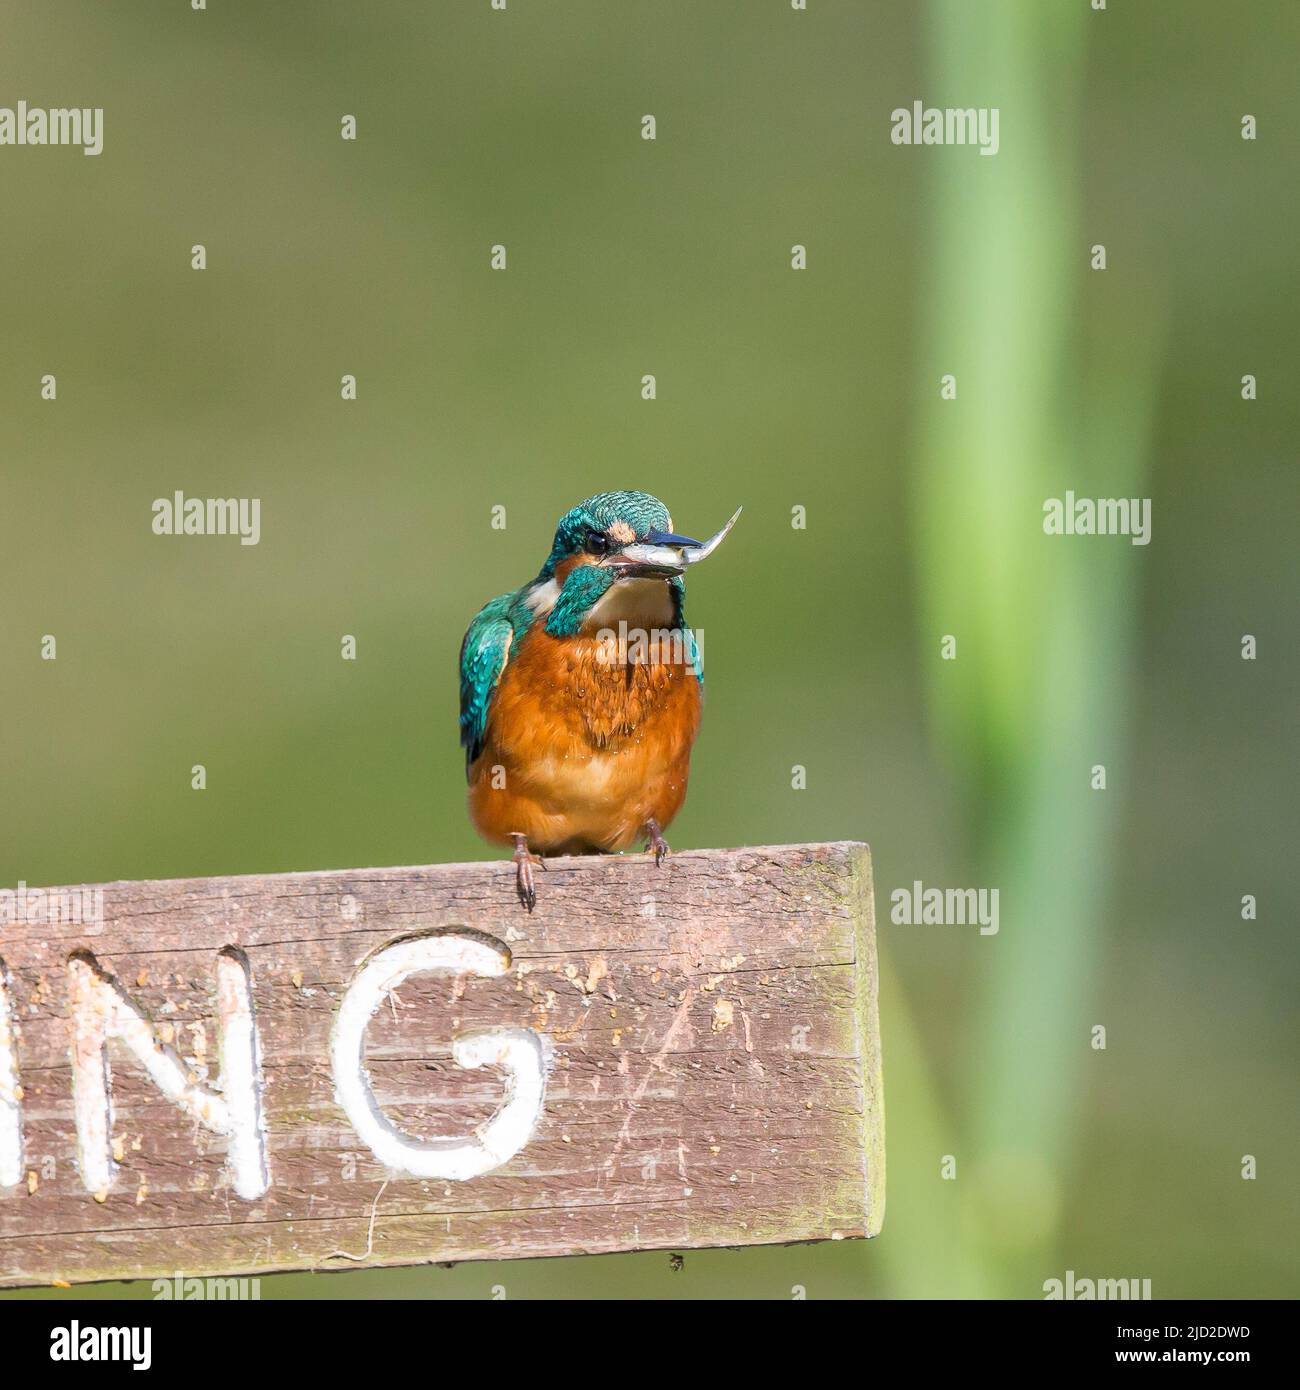 Arley, UK. 17th June, 2022. UK weather: very warm temperatures and bright skies offer the perfect time for a little fishing. A busy kingfisher bird perches on a 'No Fishing' sign eating the freshly caught fish in its beak. Credit: Lee Hudson/Alamy Live News Stock Photo